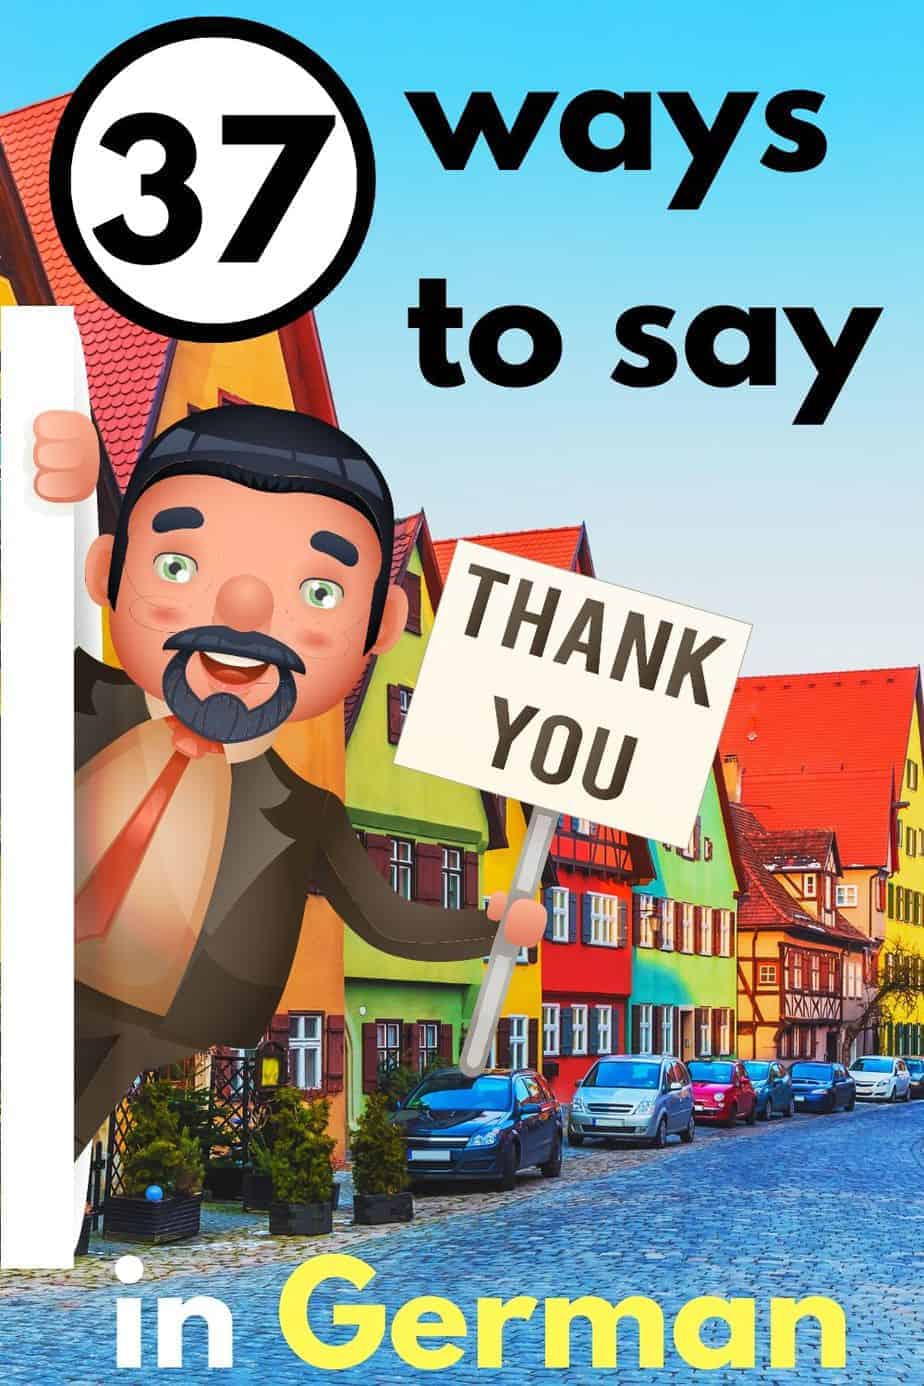 37 Ways To Say Thank You in German